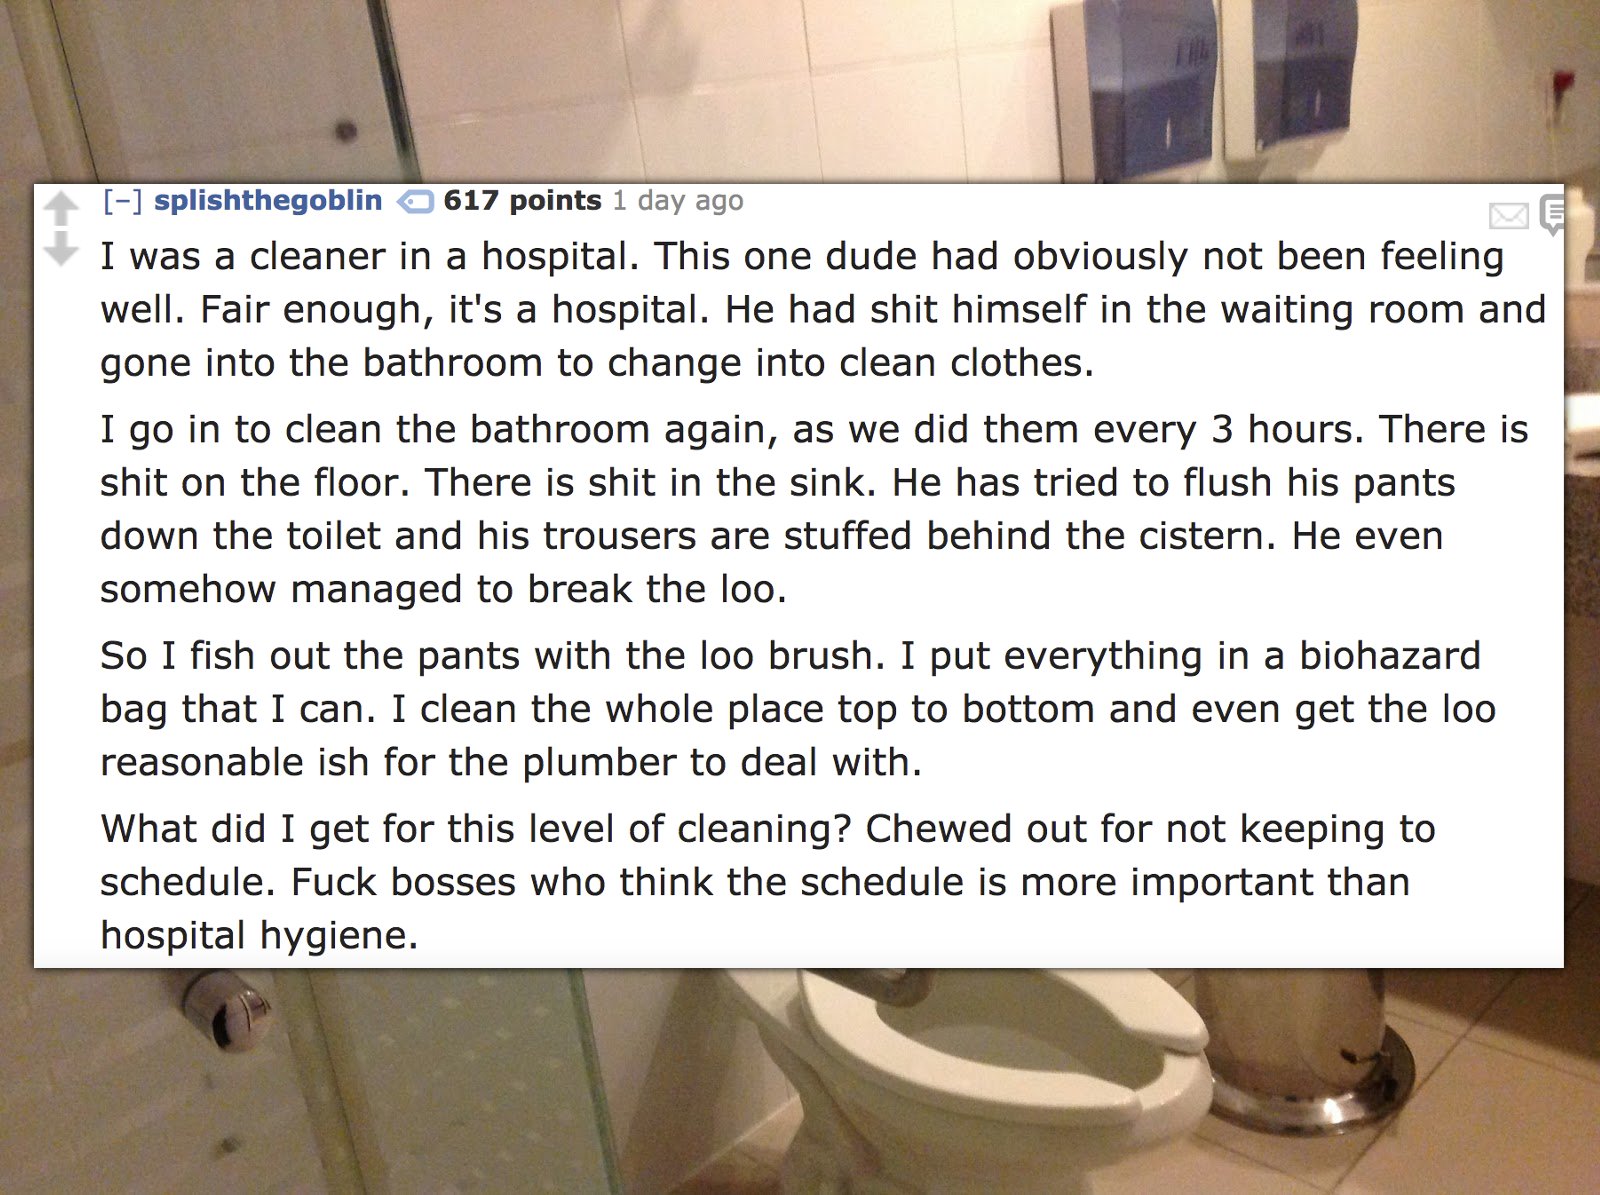 plumbing fixture - splishthegoblin 617 points 1 day ago I was a cleaner in a hospital. This one dude had obviously not been feeling well. Fair enough, it's a hospital. He had shit himself in the waiting room and gone into the bathroom to change into clean